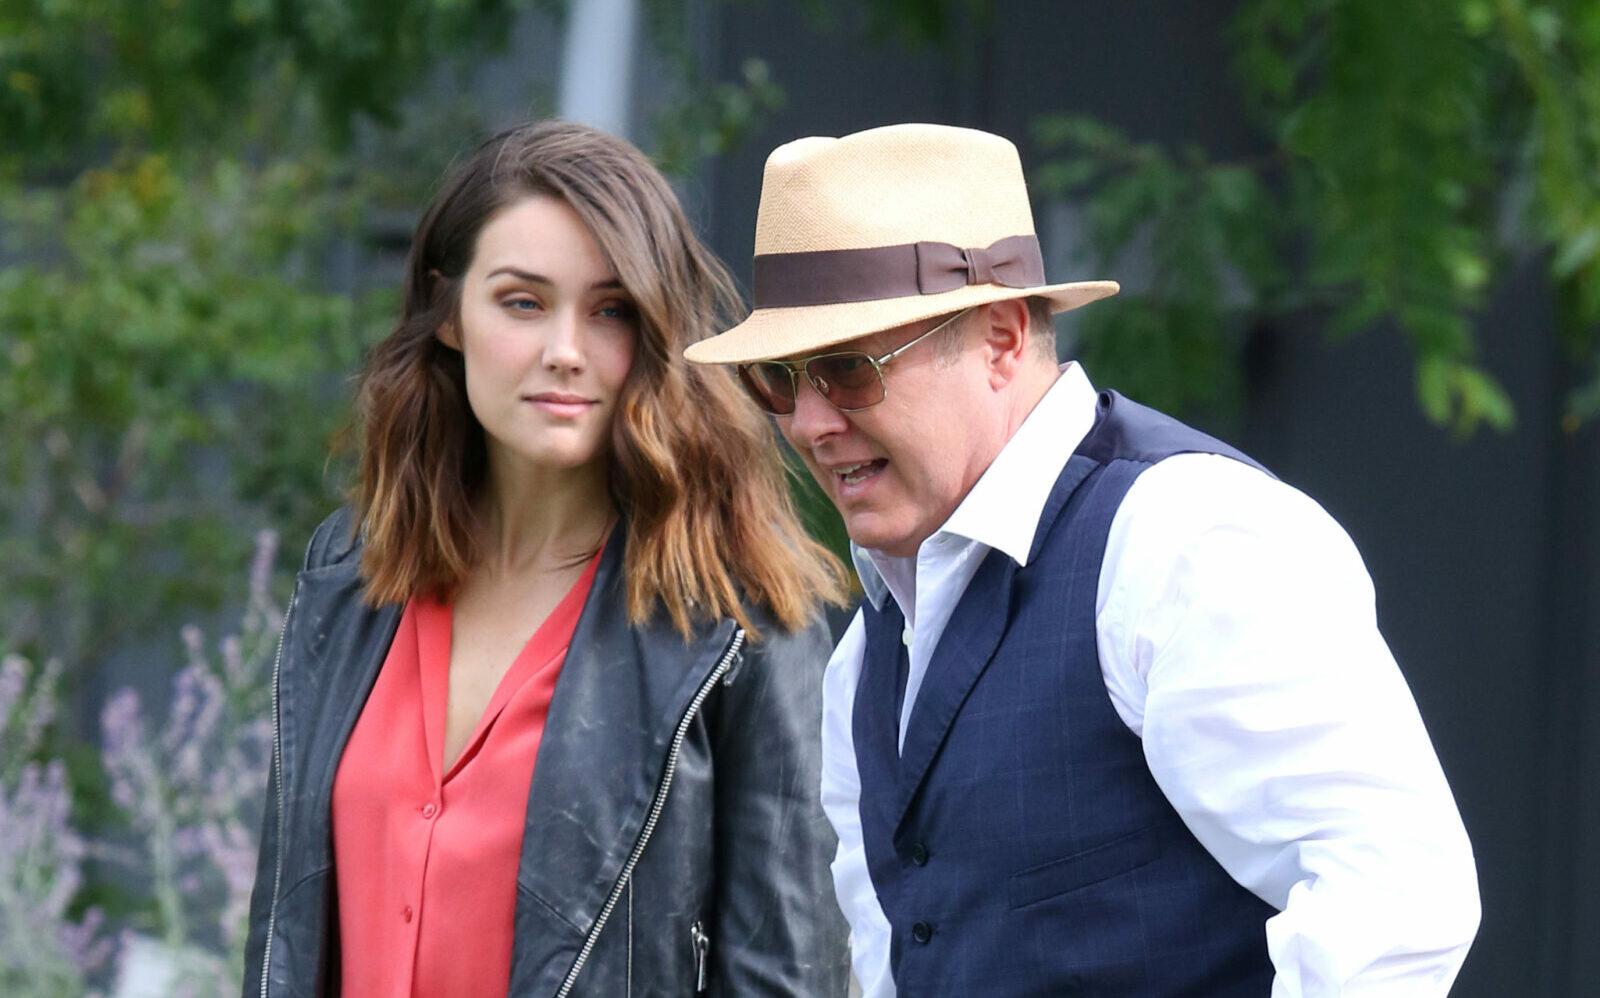 James Spader and Megan Boone play Mini Golf in NYC